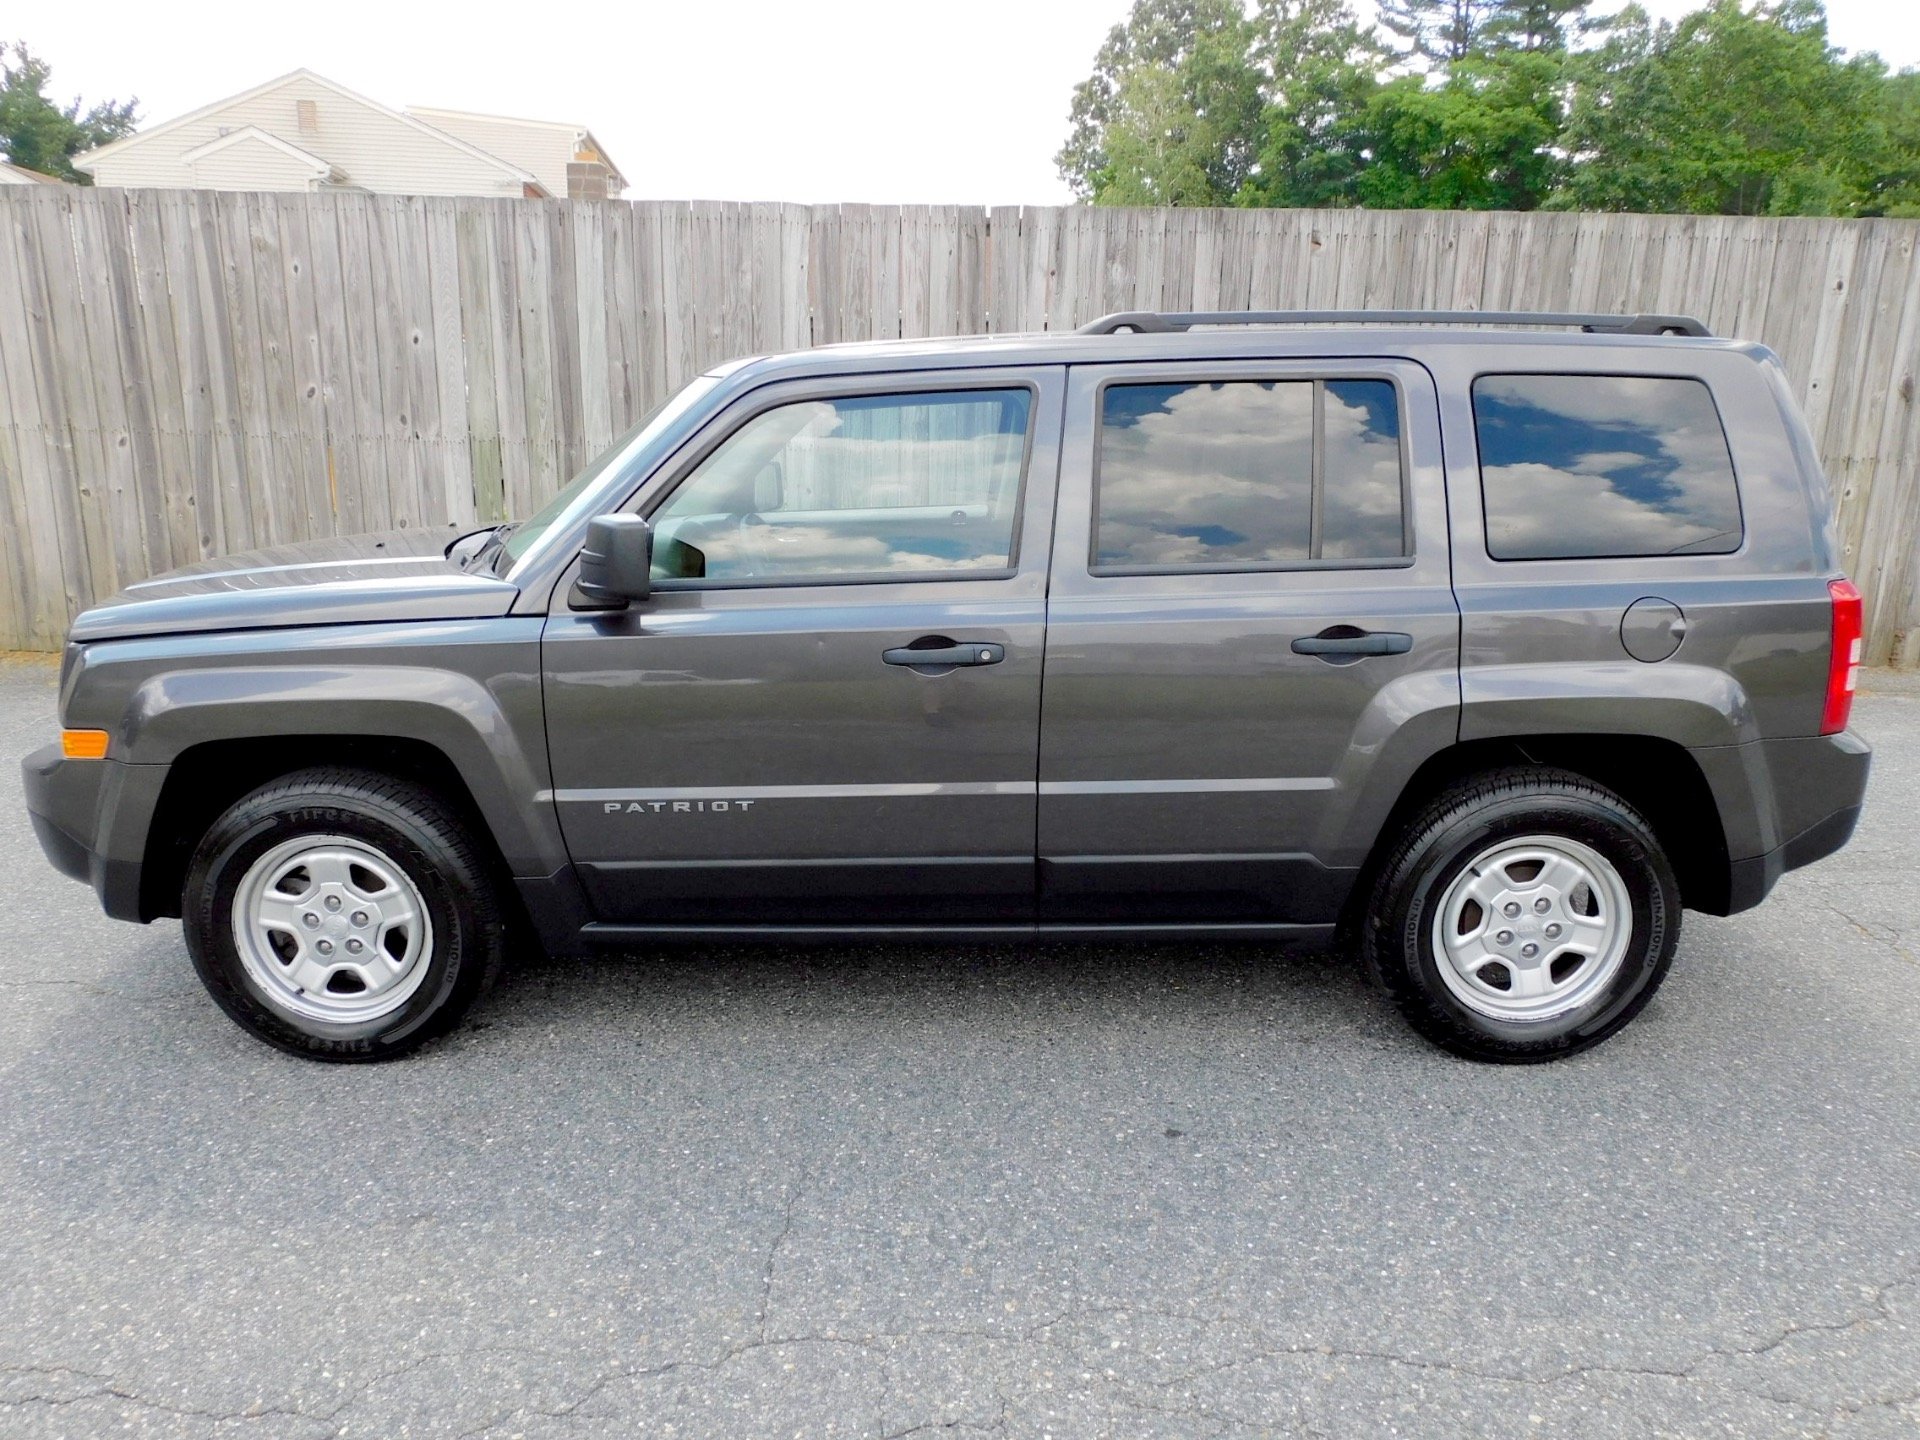 Used 2015 Jeep Patriot FWD Sport For Sale ($11,800 ...